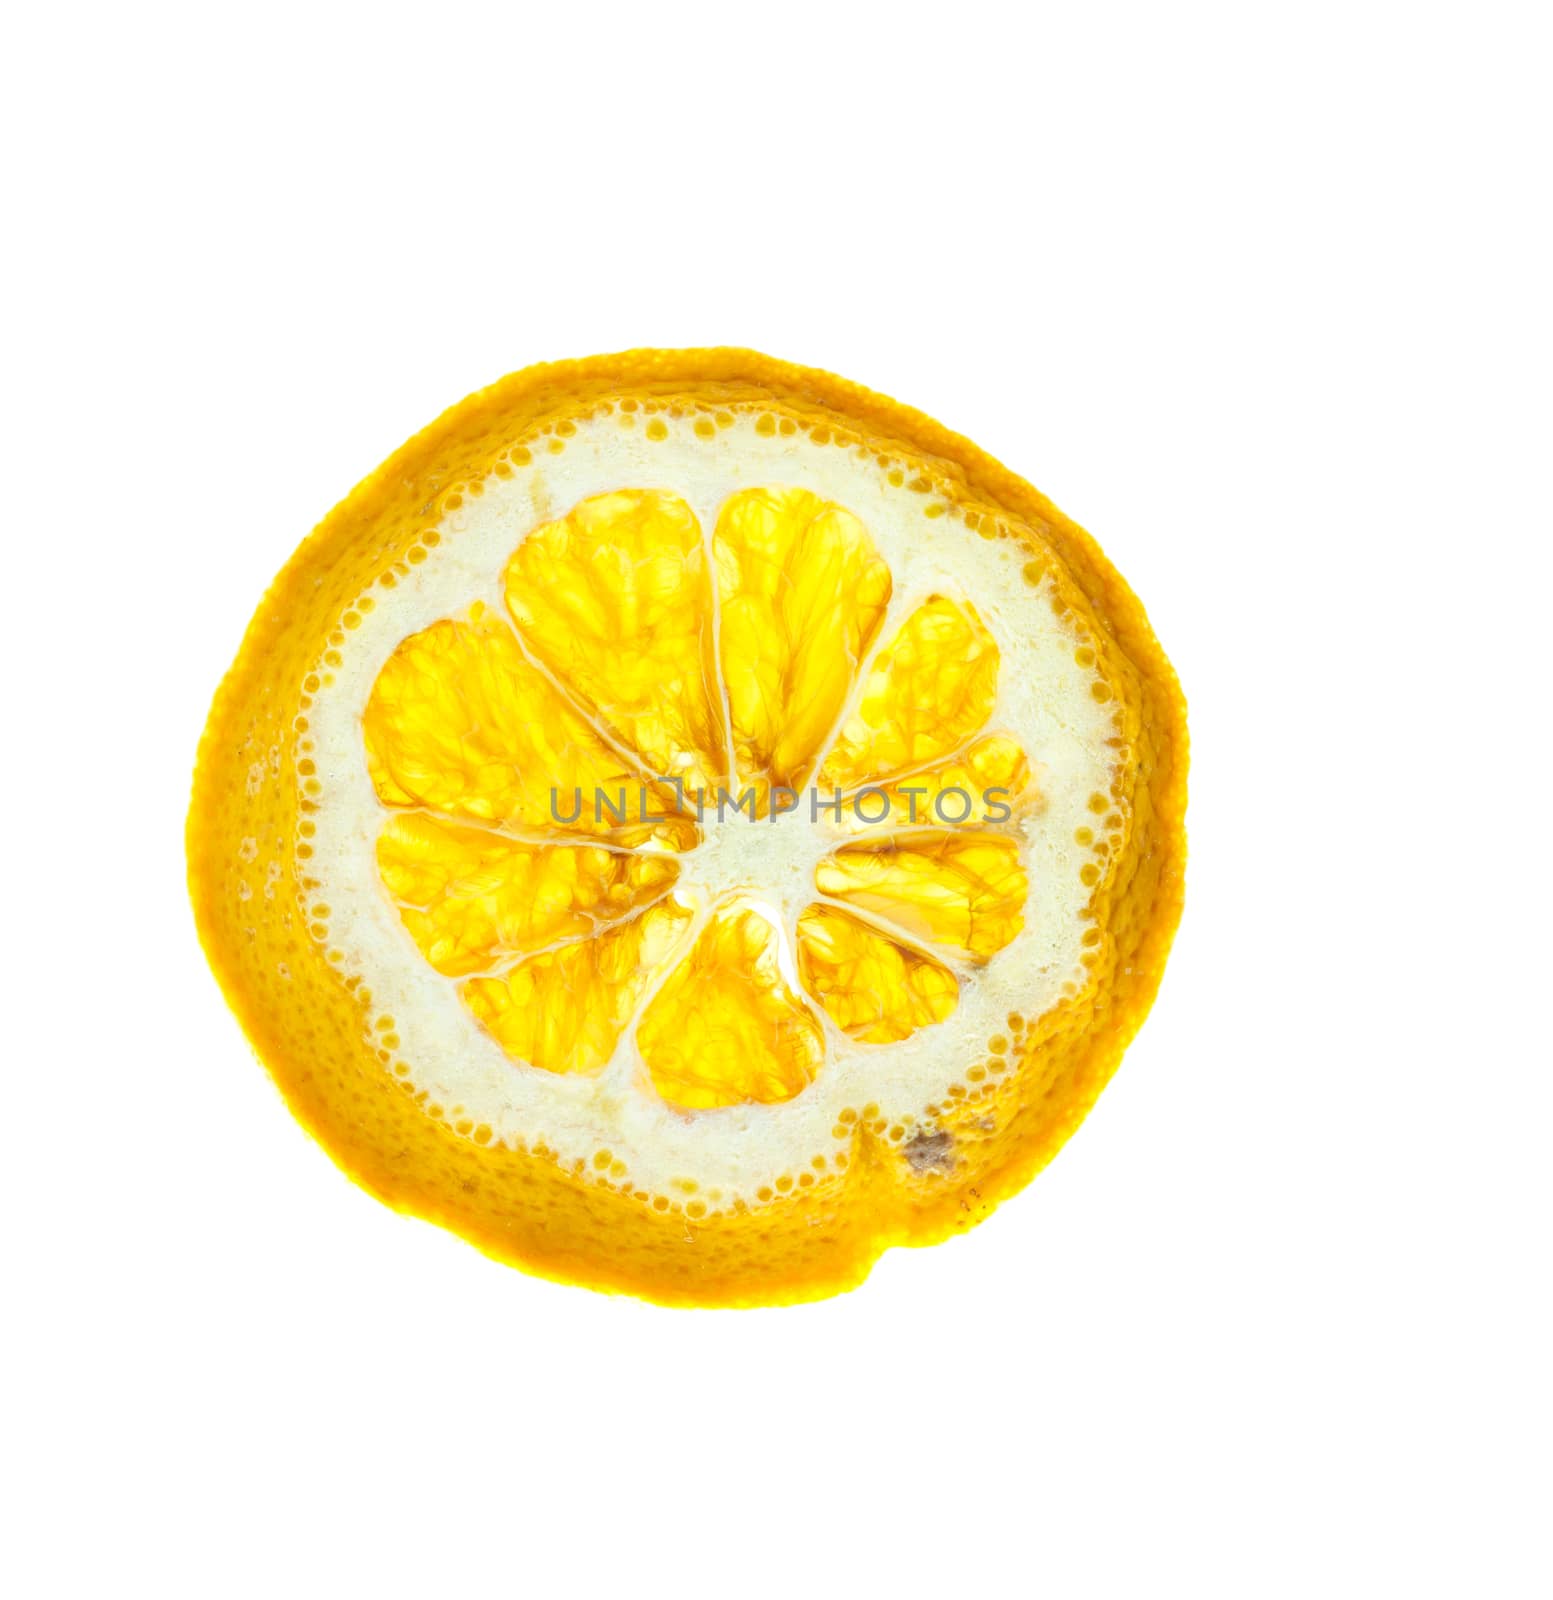 Dried lemons on a white background.